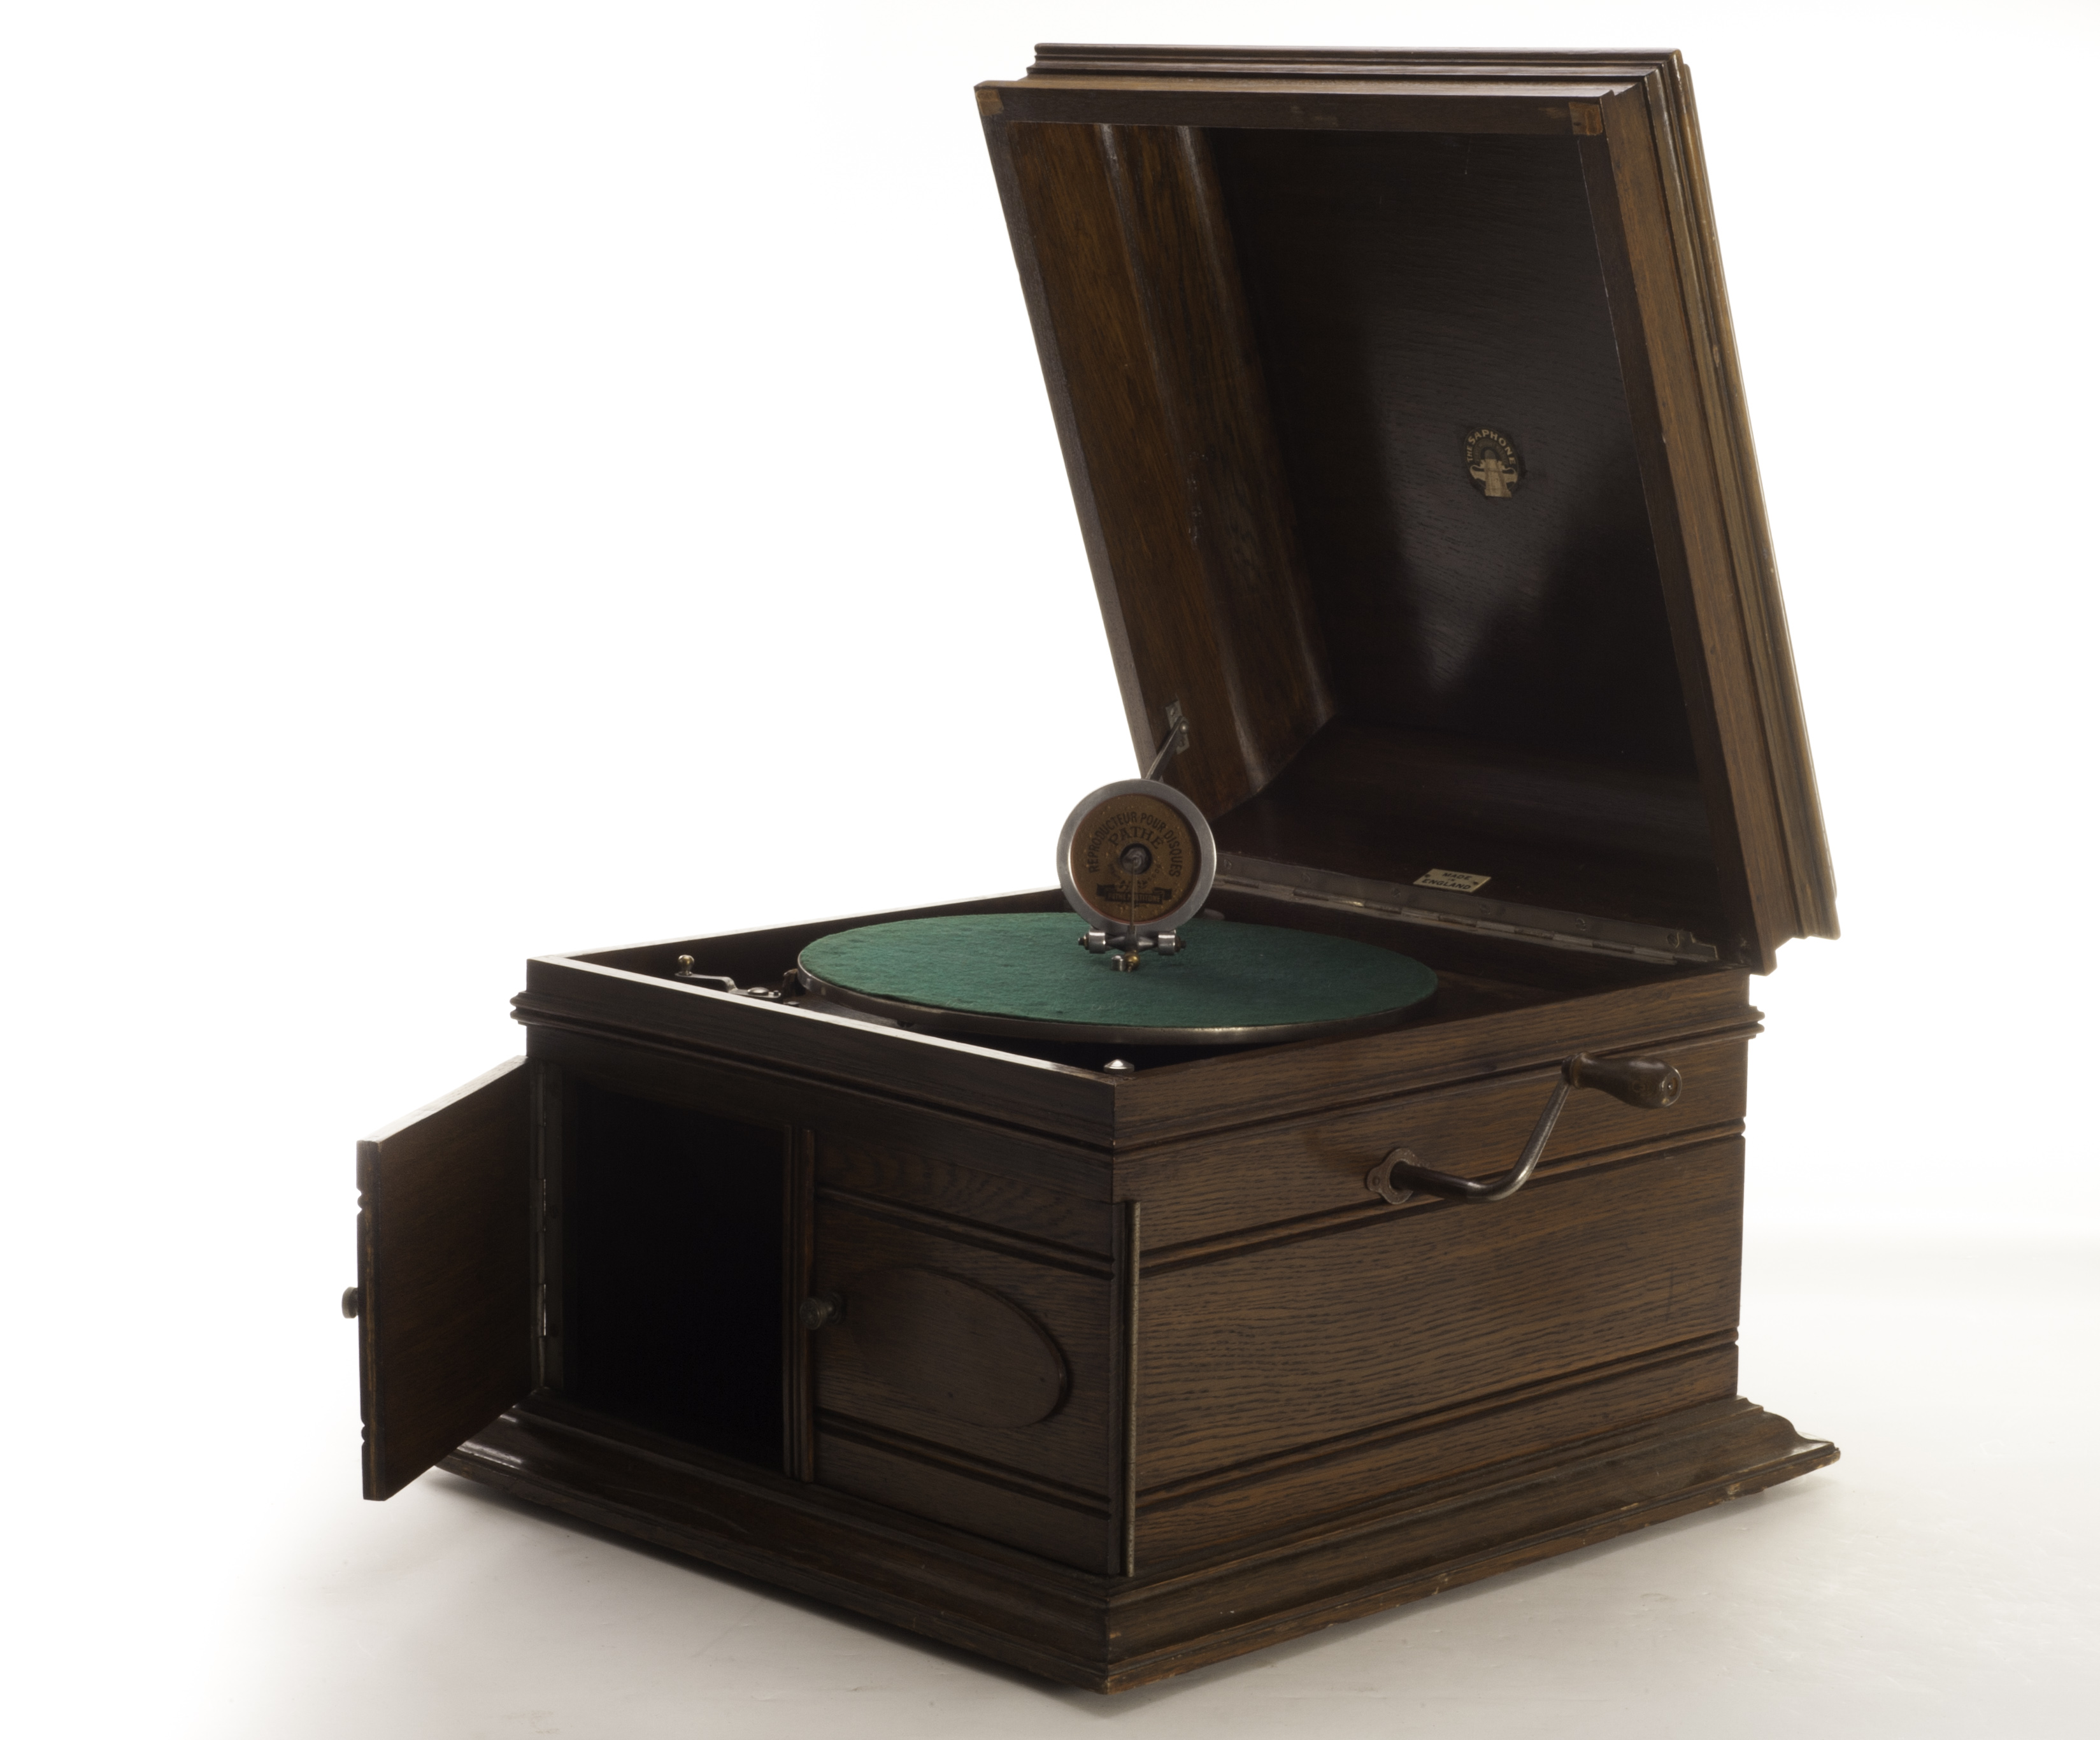 Table grand gramophone: a Saphone, in oak case, with Pathé Multitone reproducer, Thorens motor and